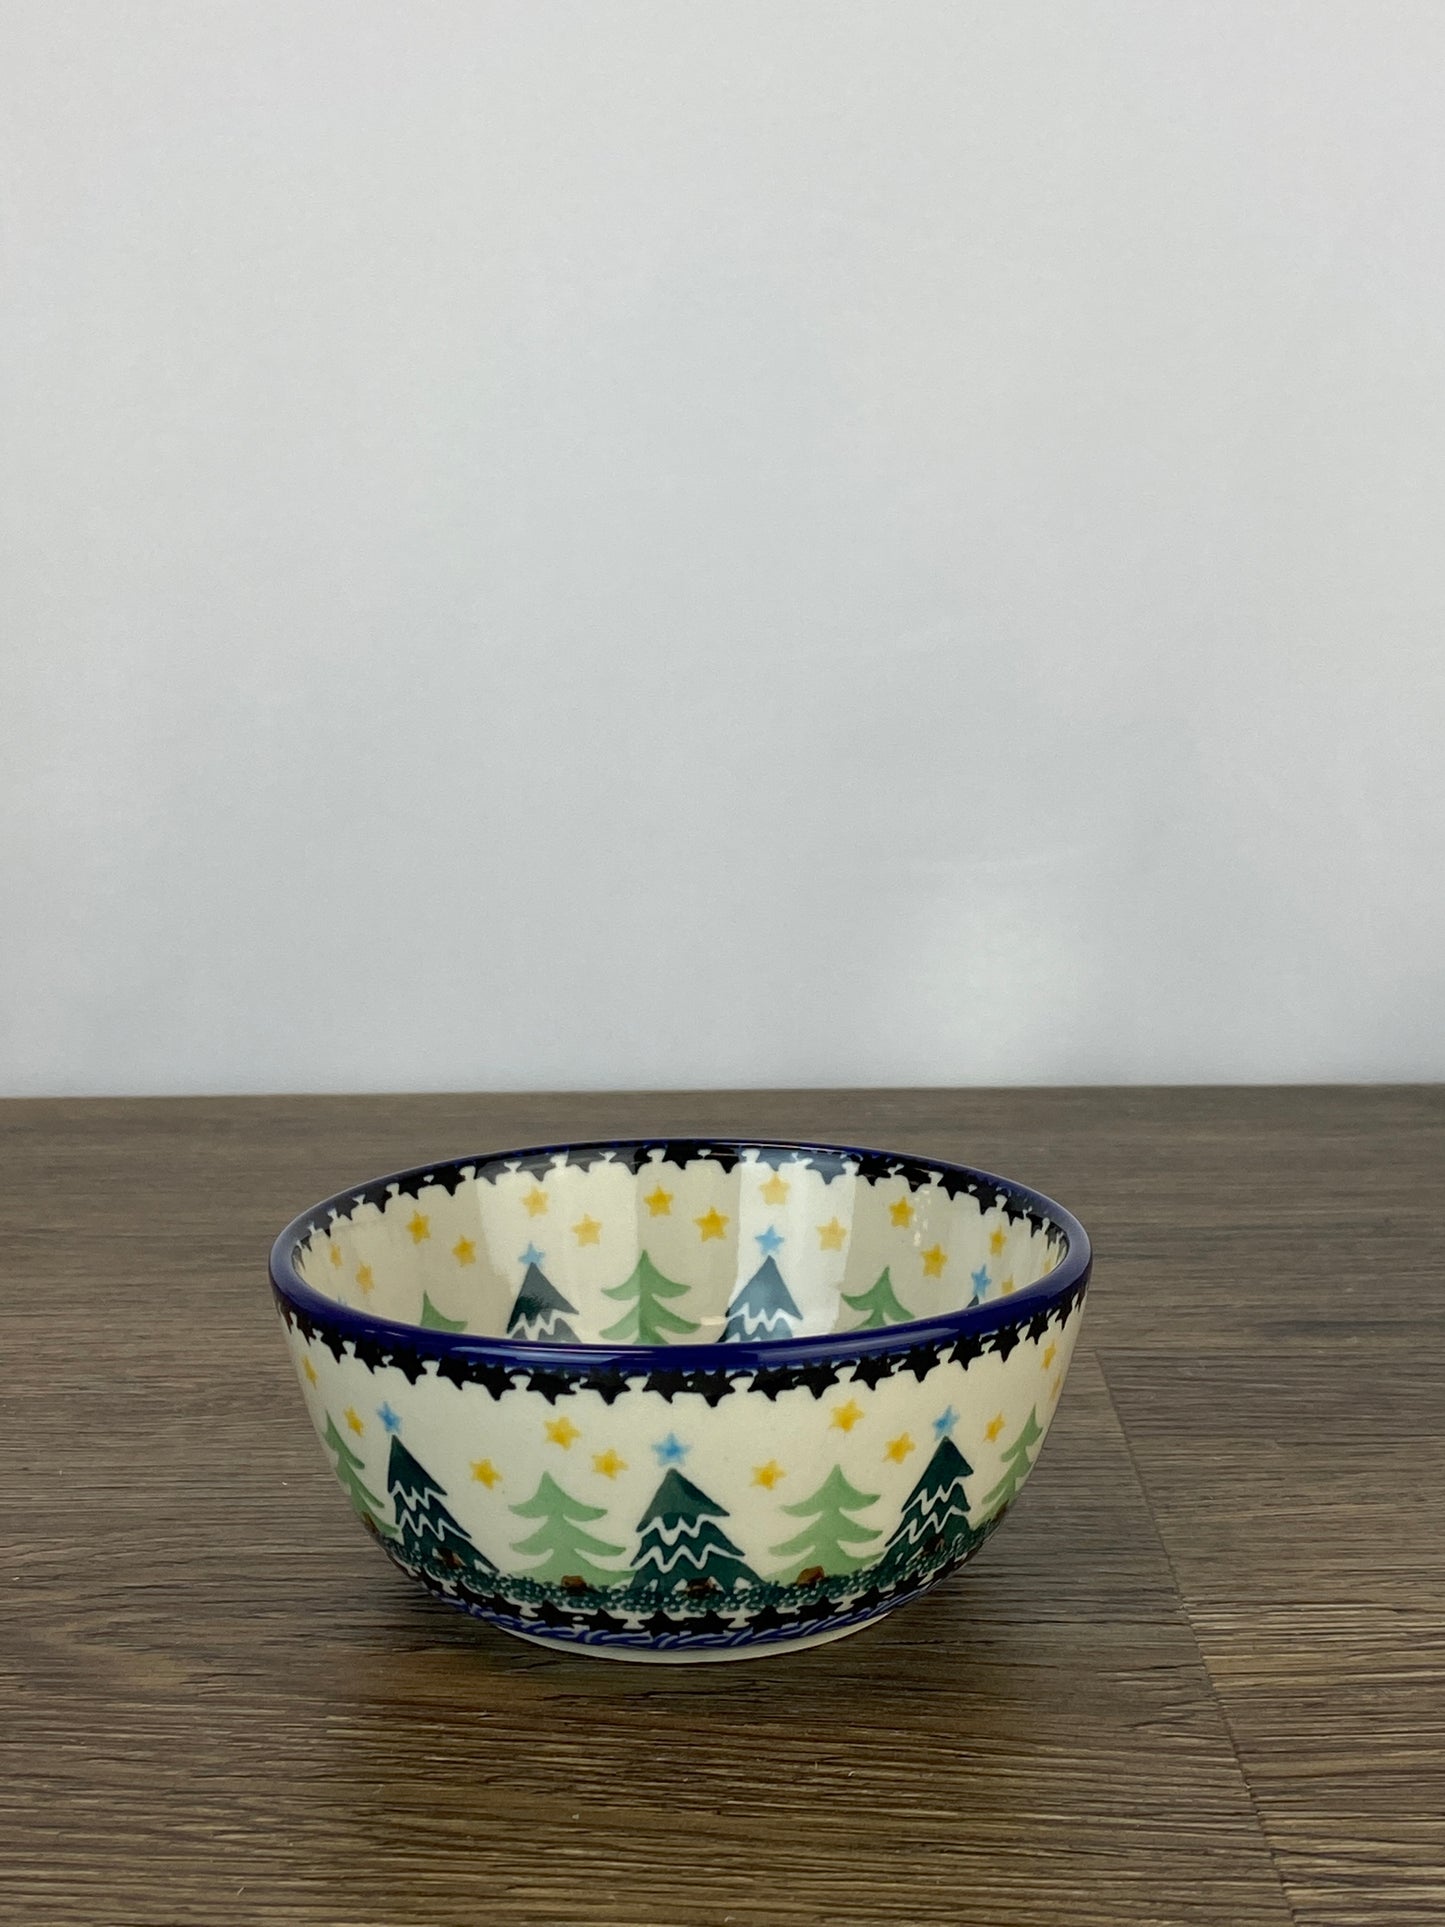 Small Cereal / Dessert Bowl - Shape 17 - Pattern 1284